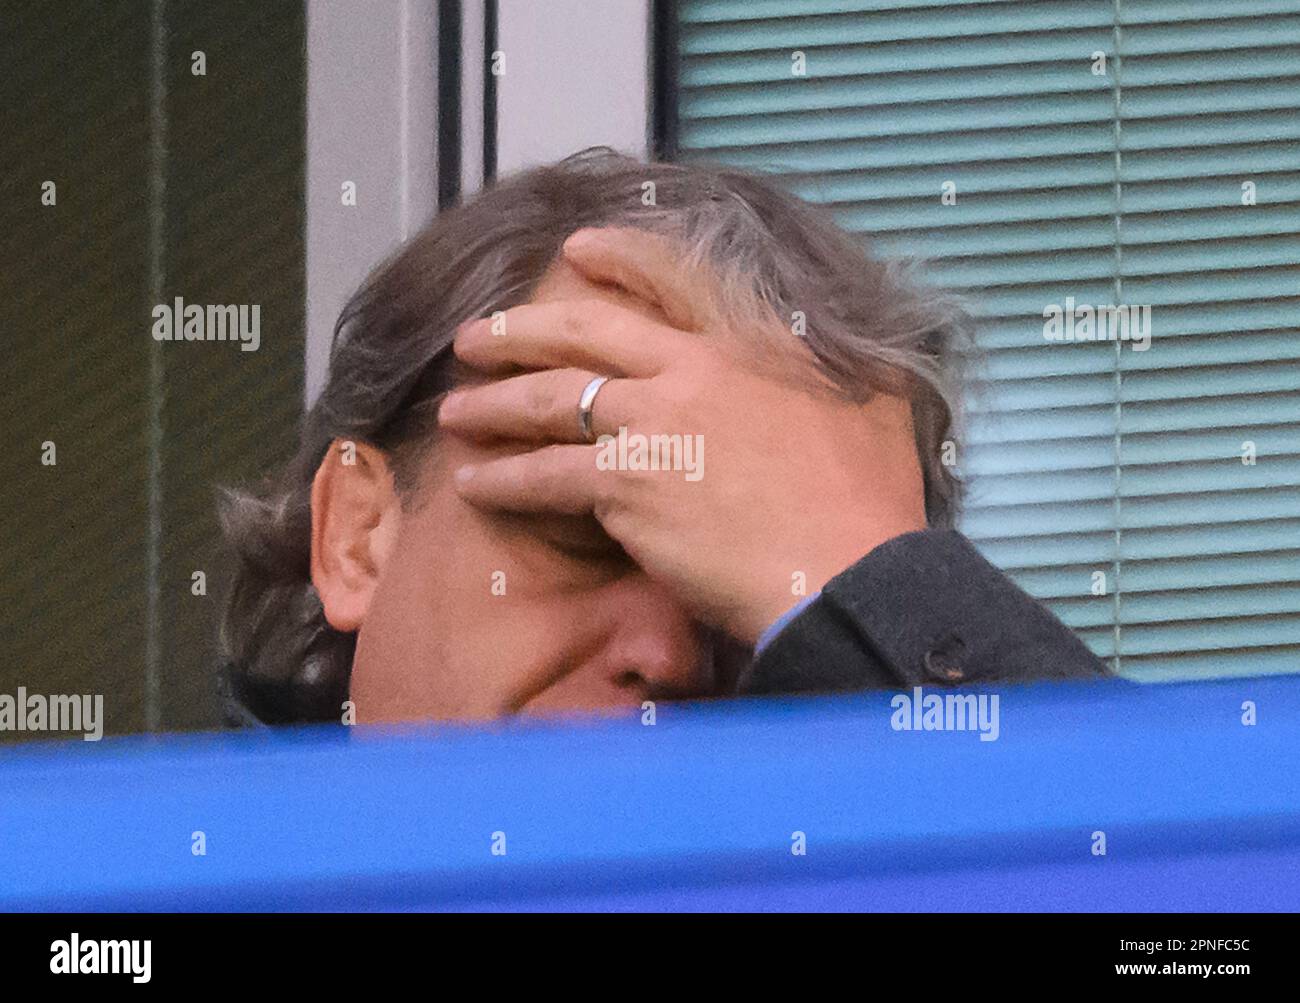 London, UK. 18th Apr, 2023. 18 Apr 2023 - Chelsea v Real Madrid - UEFA Champions League - Stamford Bridge Chelsea owner Todd Boehly during the Champions League match at Stamford Bridge, London. Picture Credit: Mark Pain/Alamy Live News Stock Photo